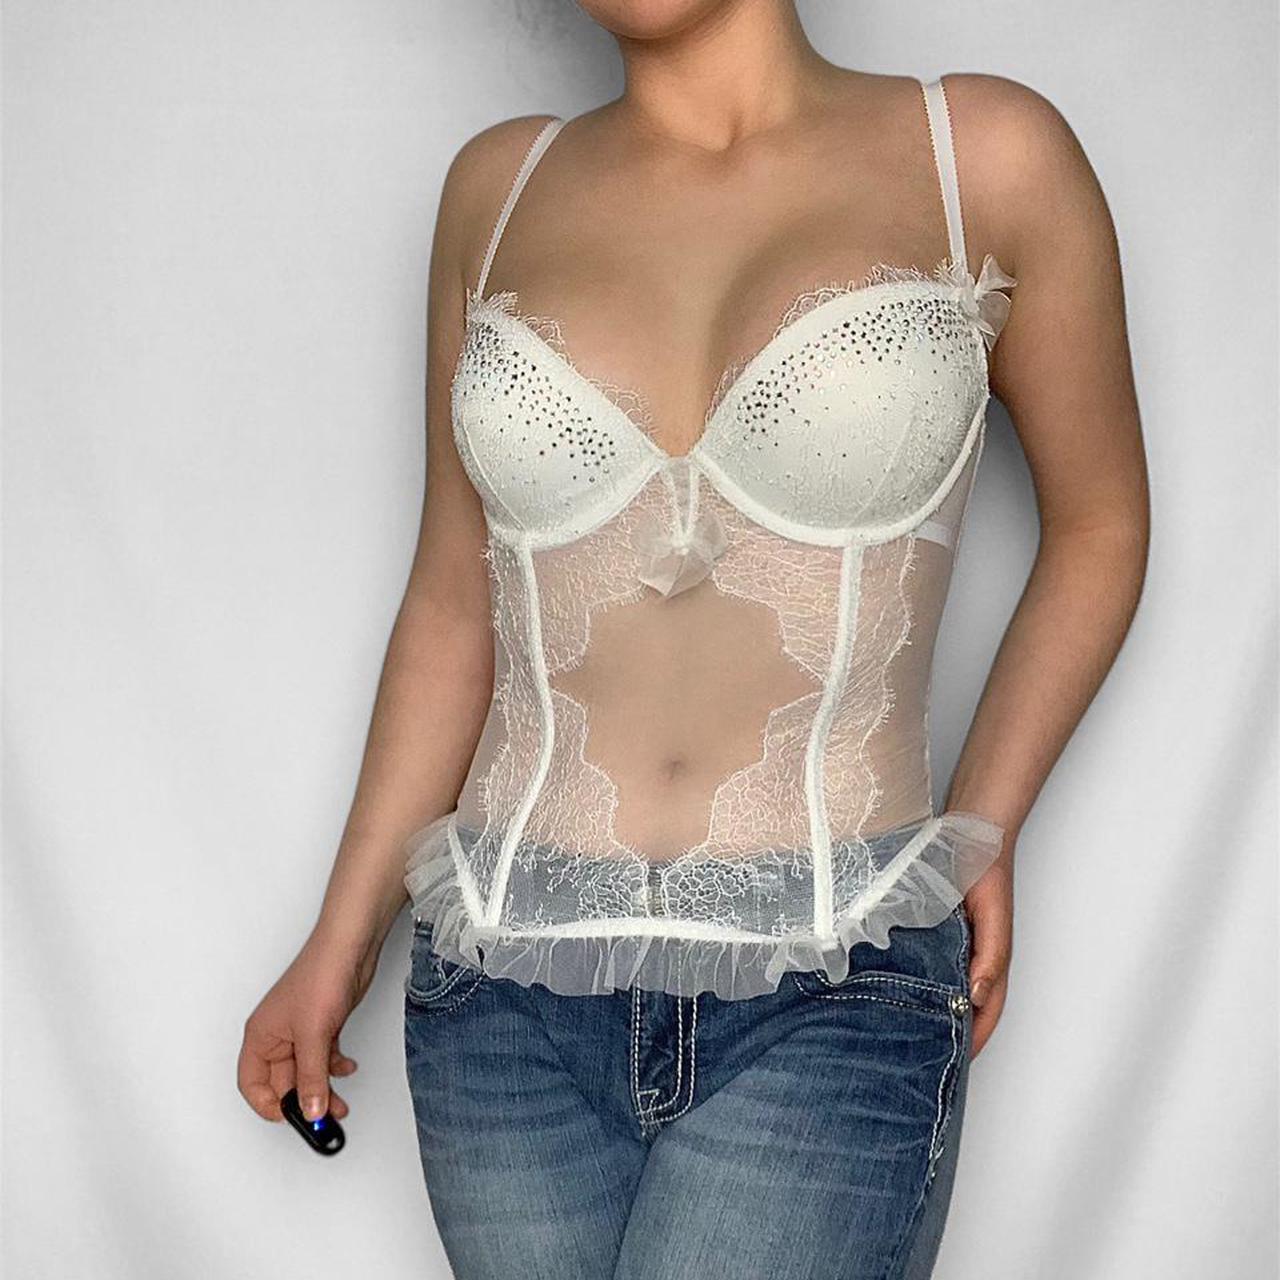 Victoria's Secret Victoria secret see through bralette. M White Size M -  $15 New With Tags - From Jayoung